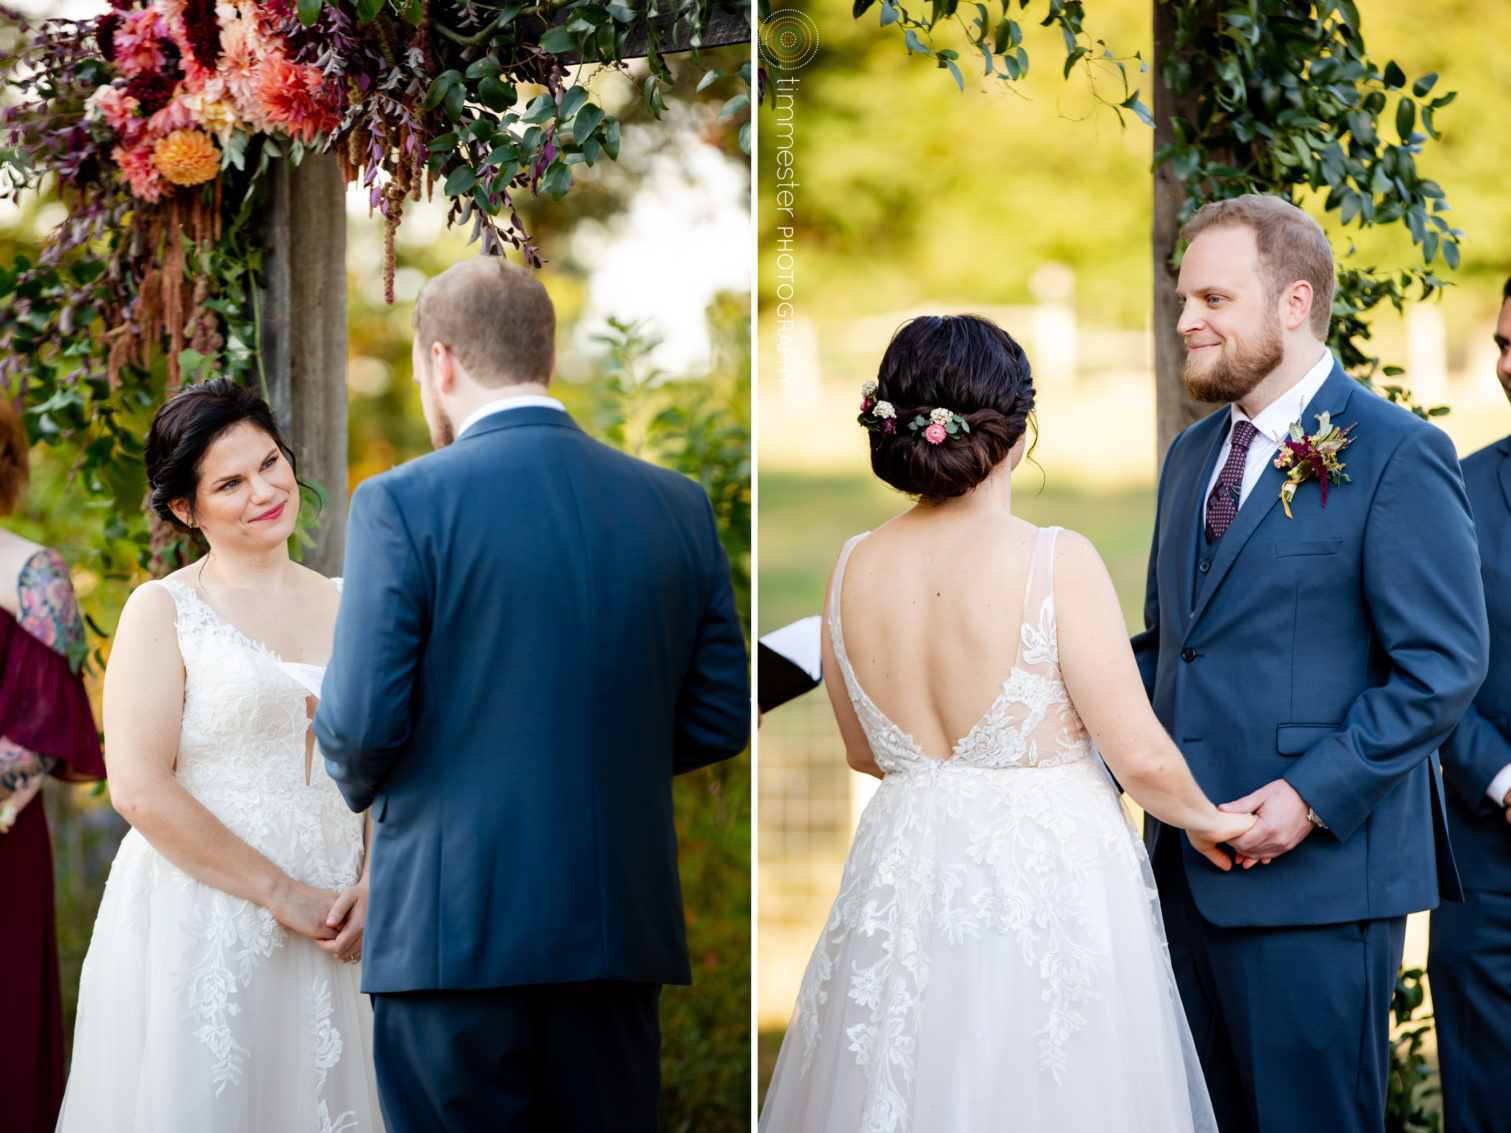 A Sassafras Fork Farm wedding outdoors in October in Rougemont, NC